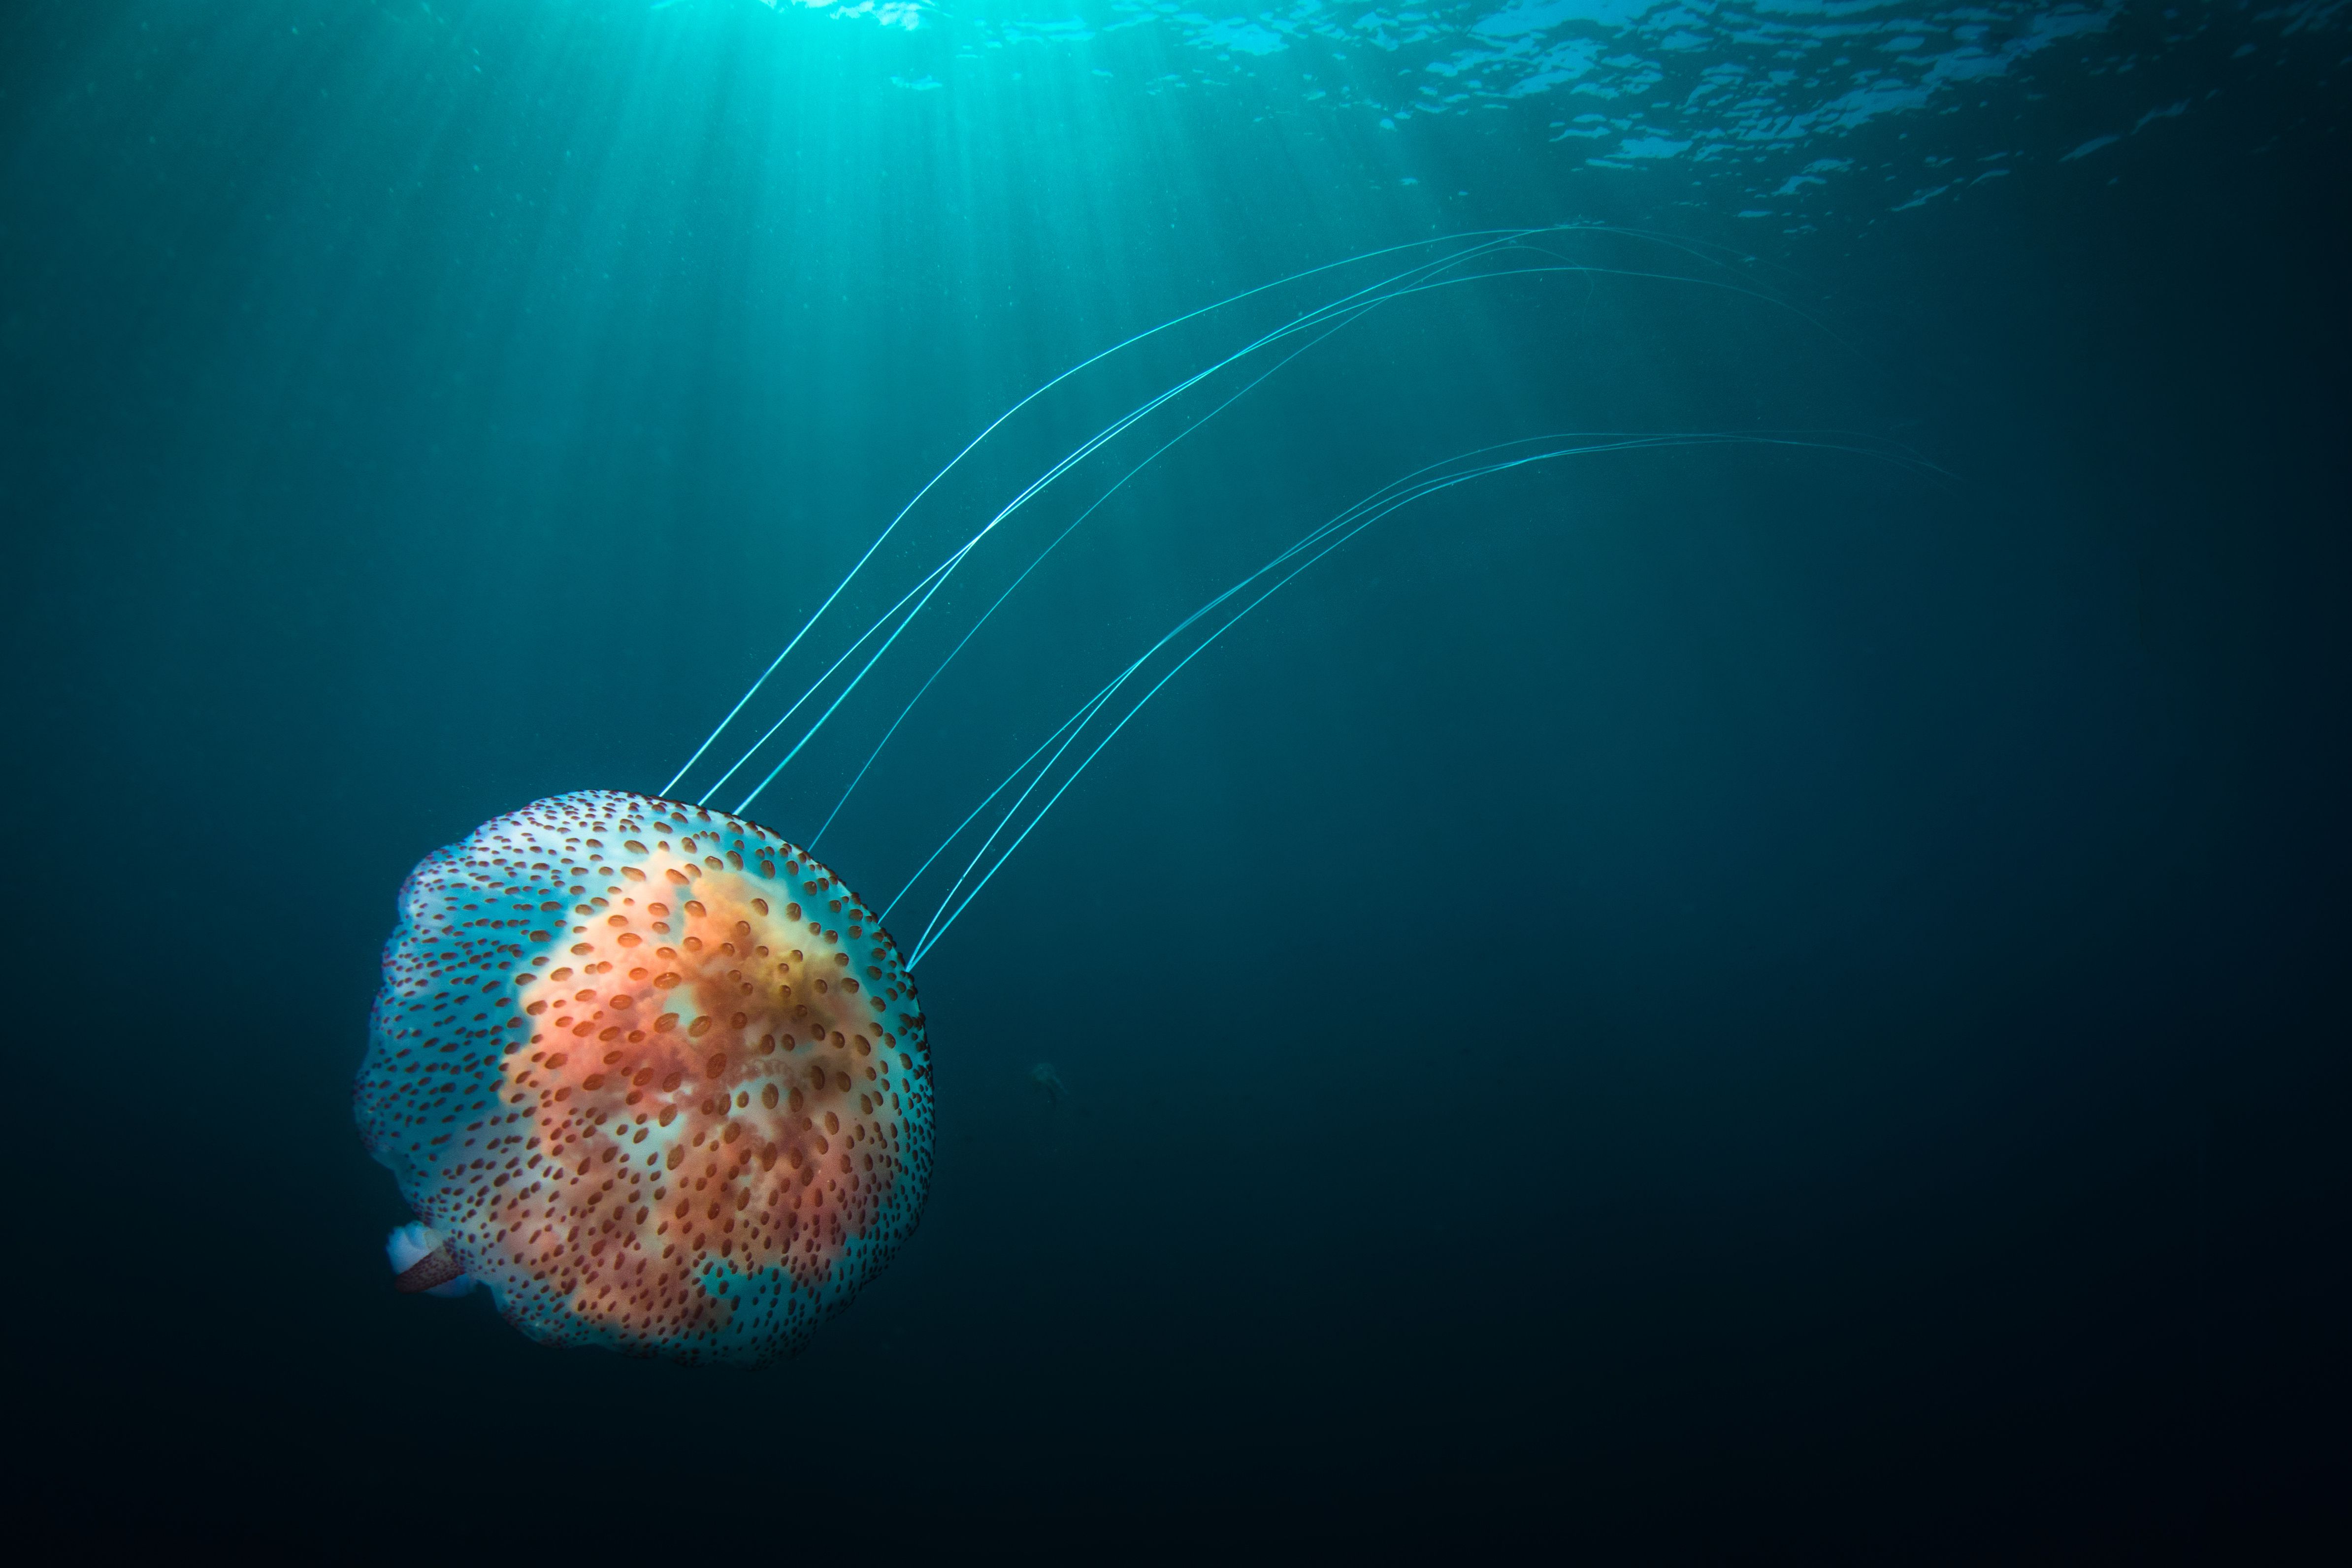 Jellyfish Wordsearch, Vocabulary, Crossword, and More